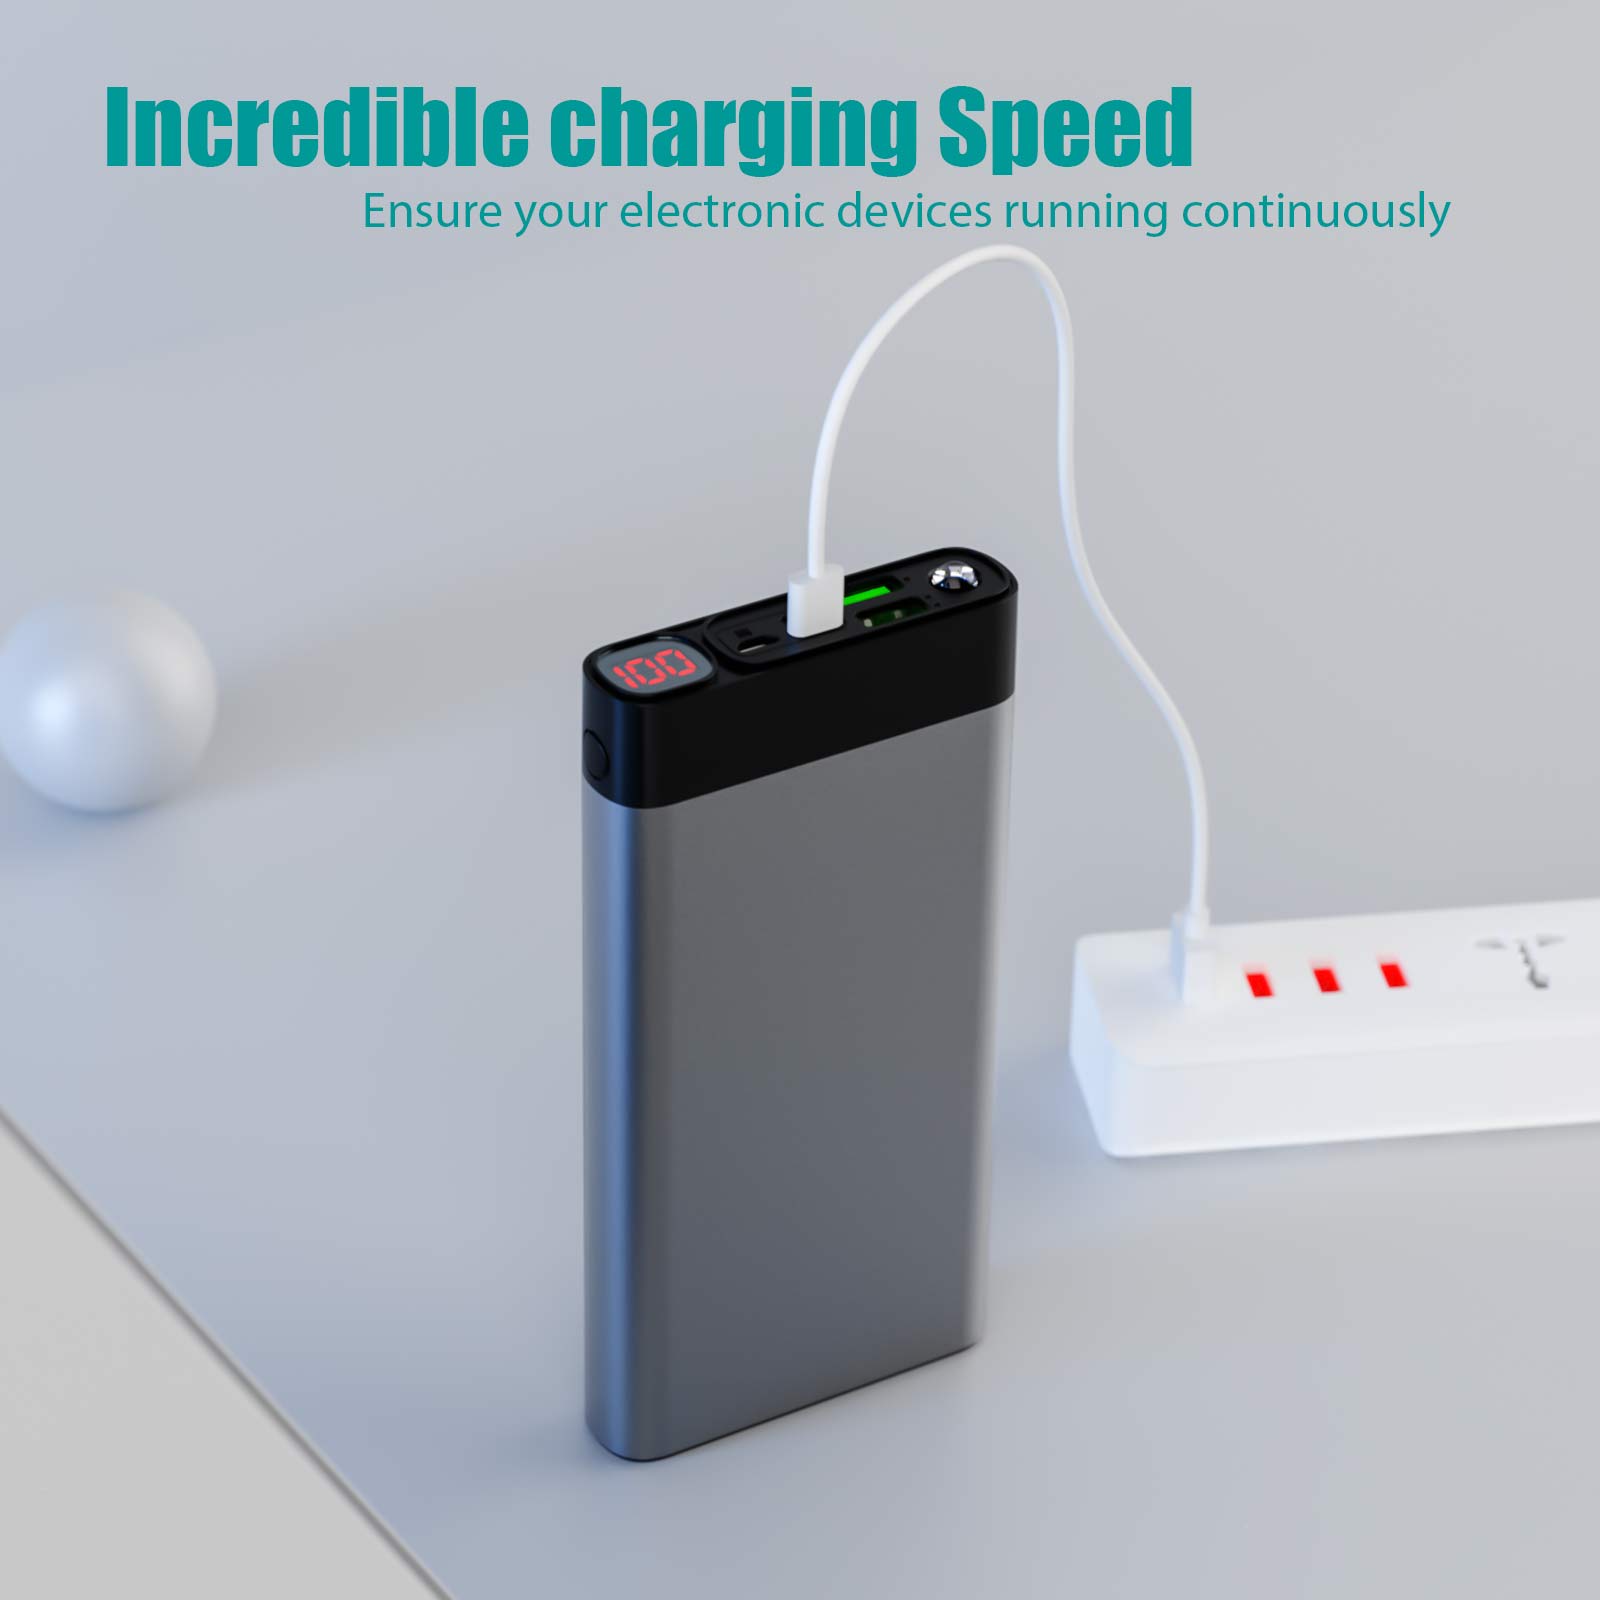 ELEFULL-Portable Power Bank, 26800mAh with QC3.0 22.5W & USB C PD20W Fast Charger in Secure Metal Case, LED Display, Flashlight - Compact & Stylish Chargers For iphone, ipad, Samsung, Huawei, Smartphones etc.